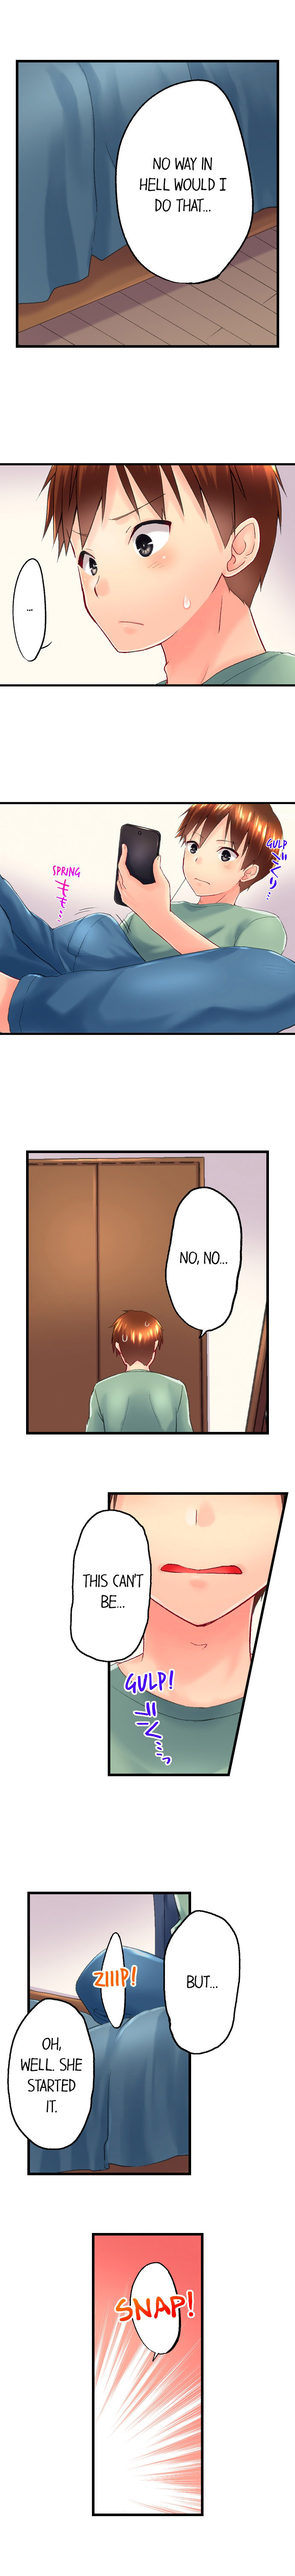 My Brother’s Slipped Inside Me in The Bathtub - Chapter 110 Page 4